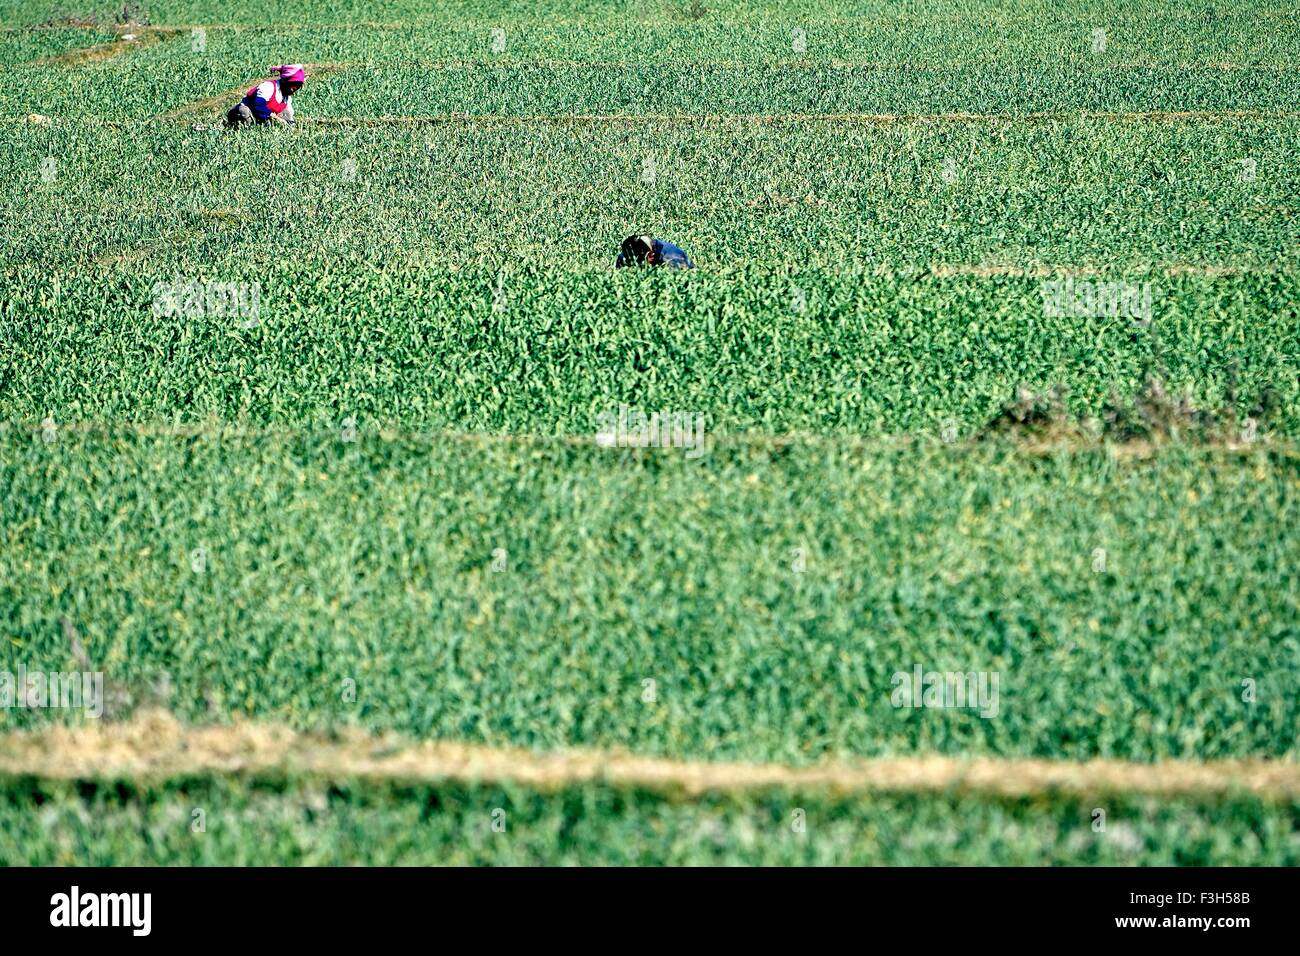 Two people harvesting rice in paddy field, Dali, Yunnan, China Stock Photo